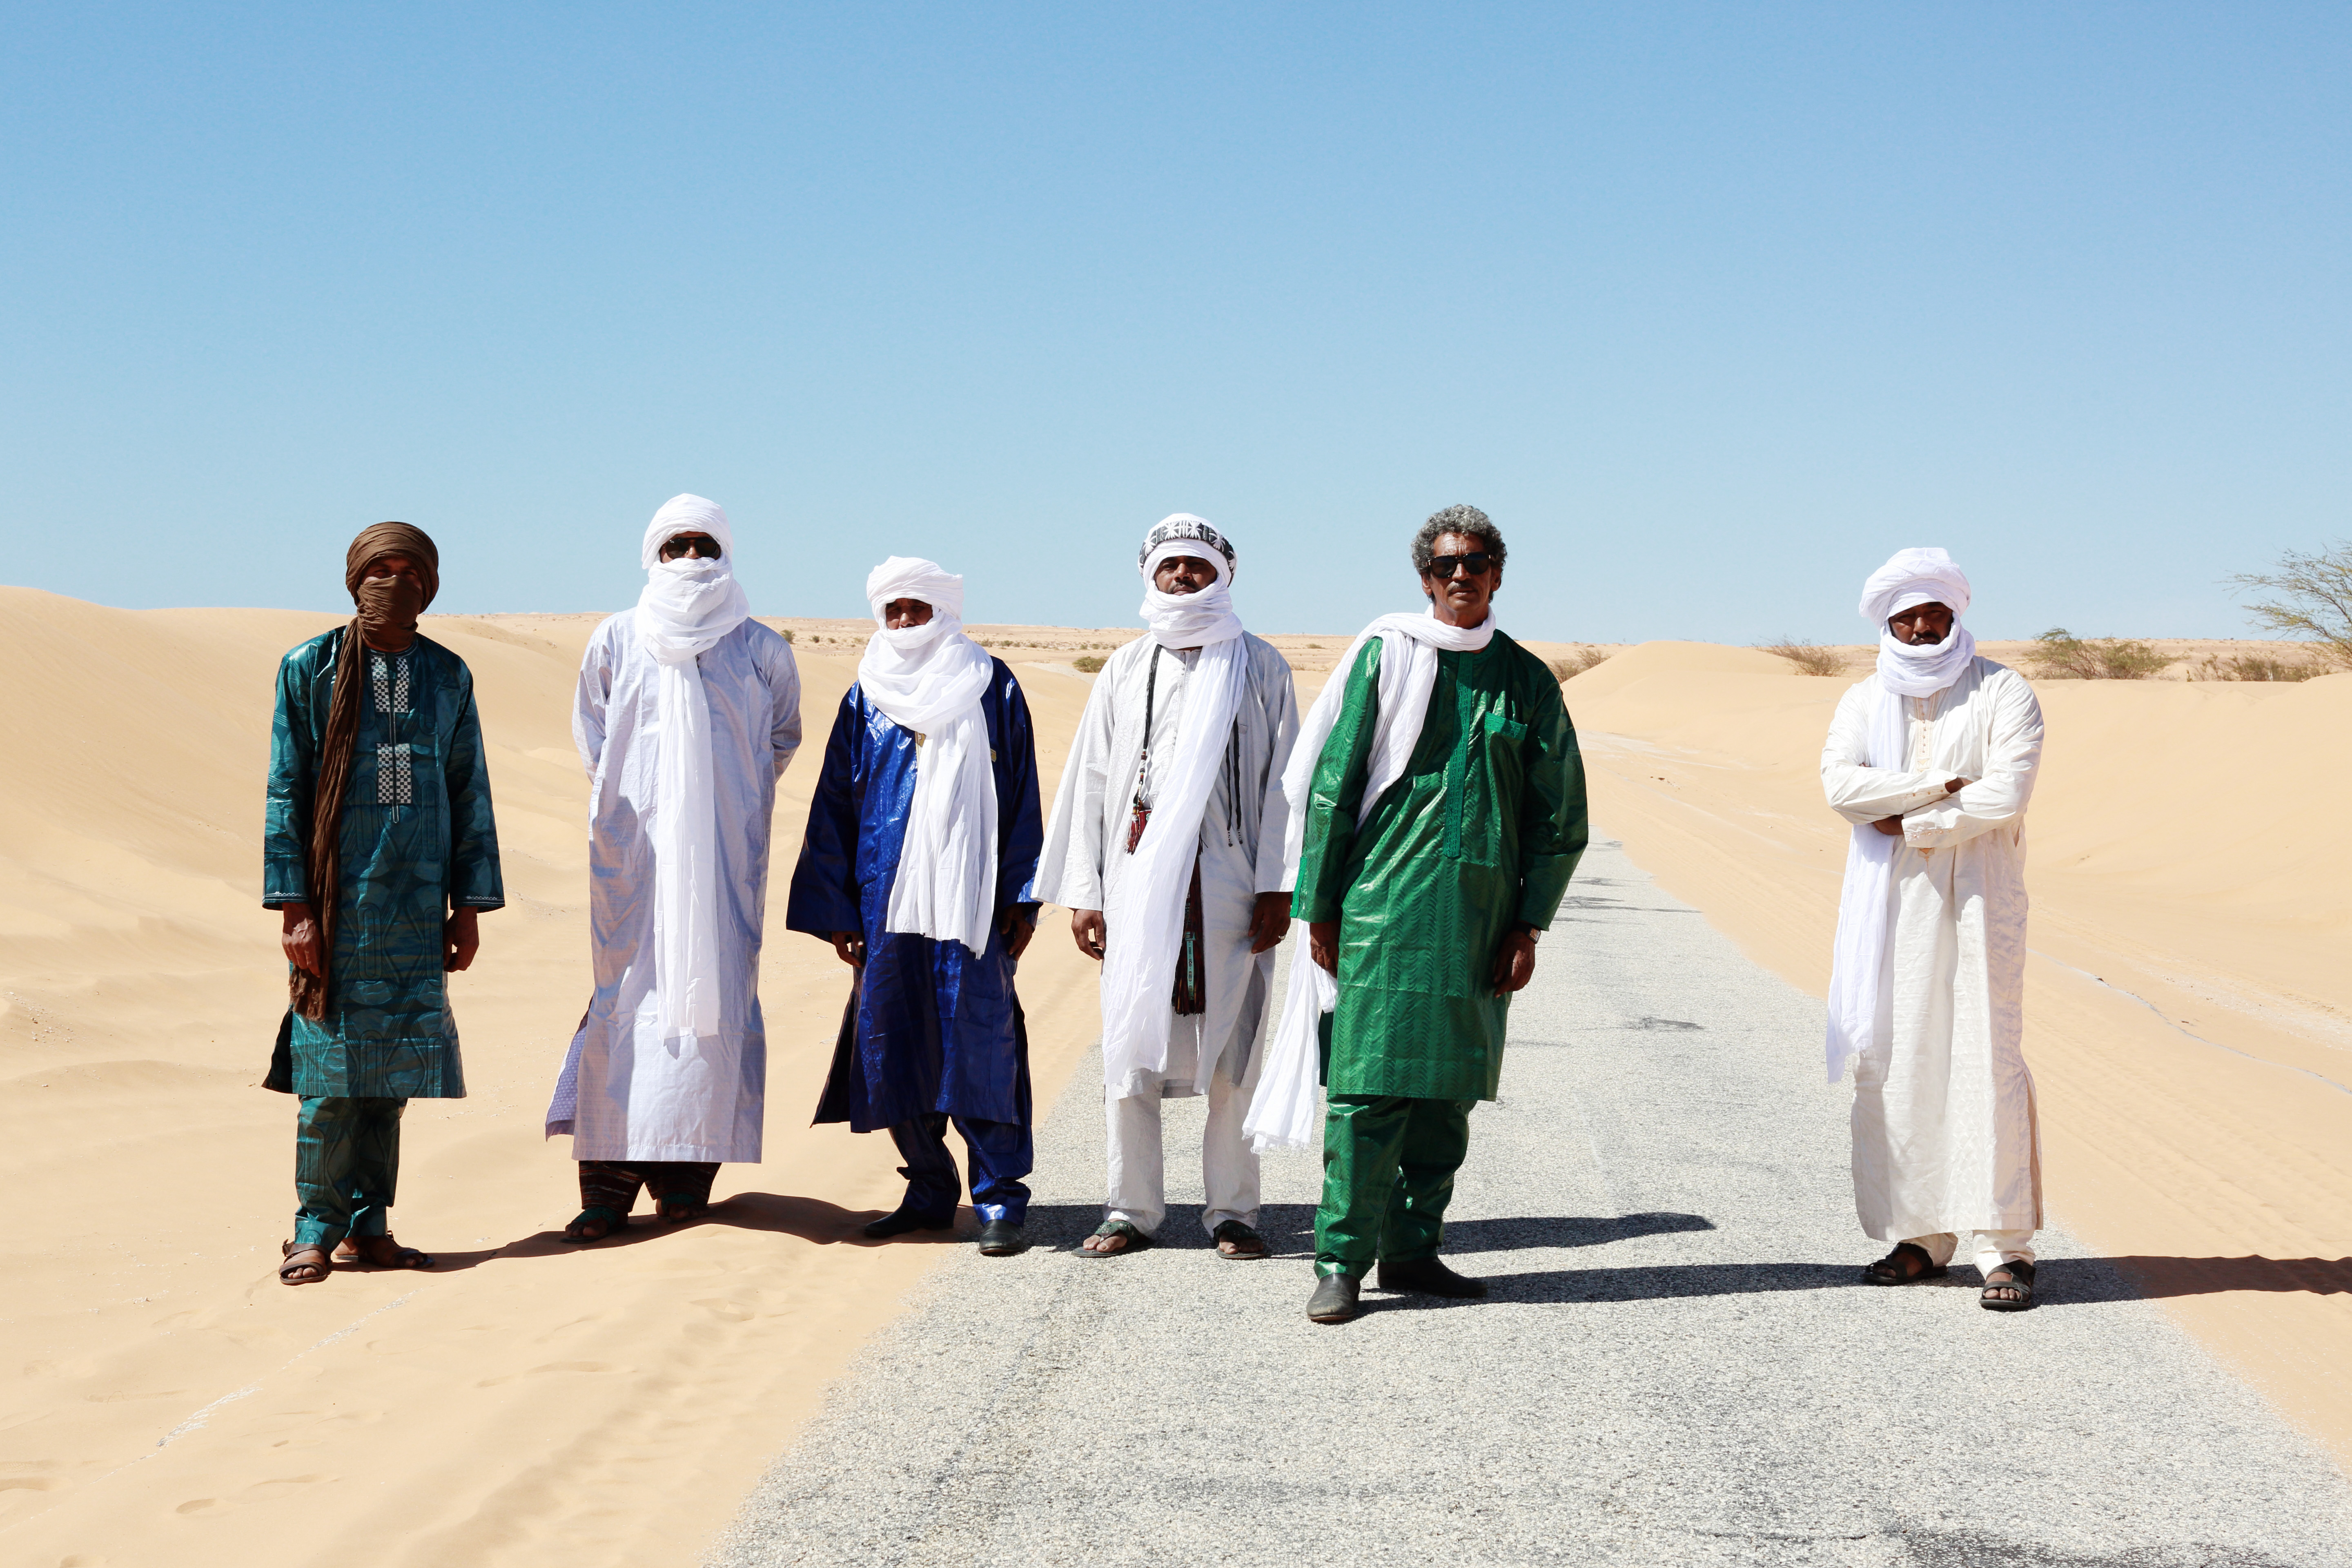 Six individuals, standing in the desert and wearing shawls, face the camera